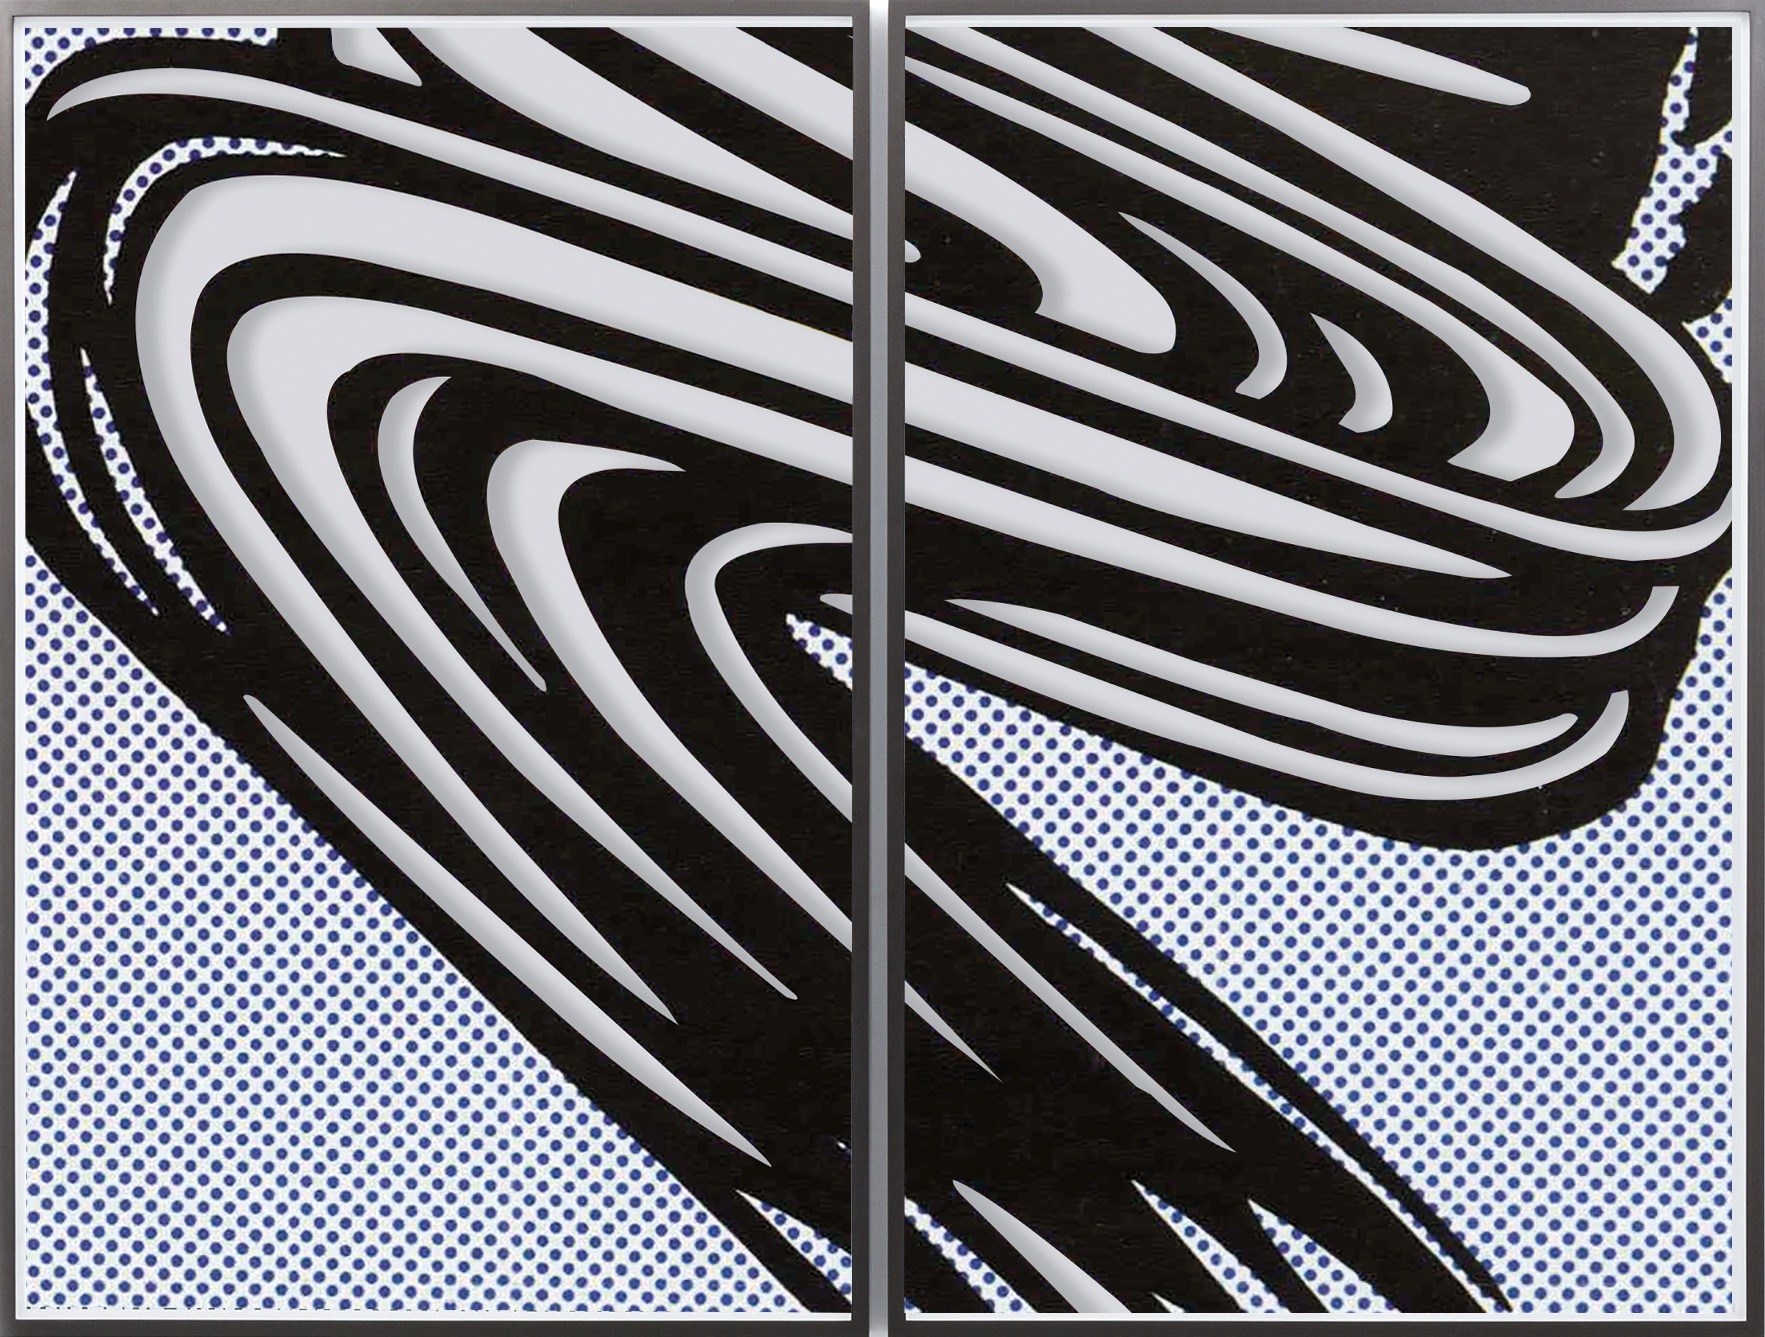 Untitled (Brushstroke), 2021
archival pigment print
paper: 88 3/16 x 55 1/8 inches (224 x 140 cm) each
framed: 90 x 56 11/16 x 3 inches (228.6 x 144 x 7.6 cm) each
overall: 90 x 114 5/8 x 3 inches (228.6 x 291.1 x 7.6 cm)
edition of 4 with 1 AP, JDa-21.19.1&nbsp;